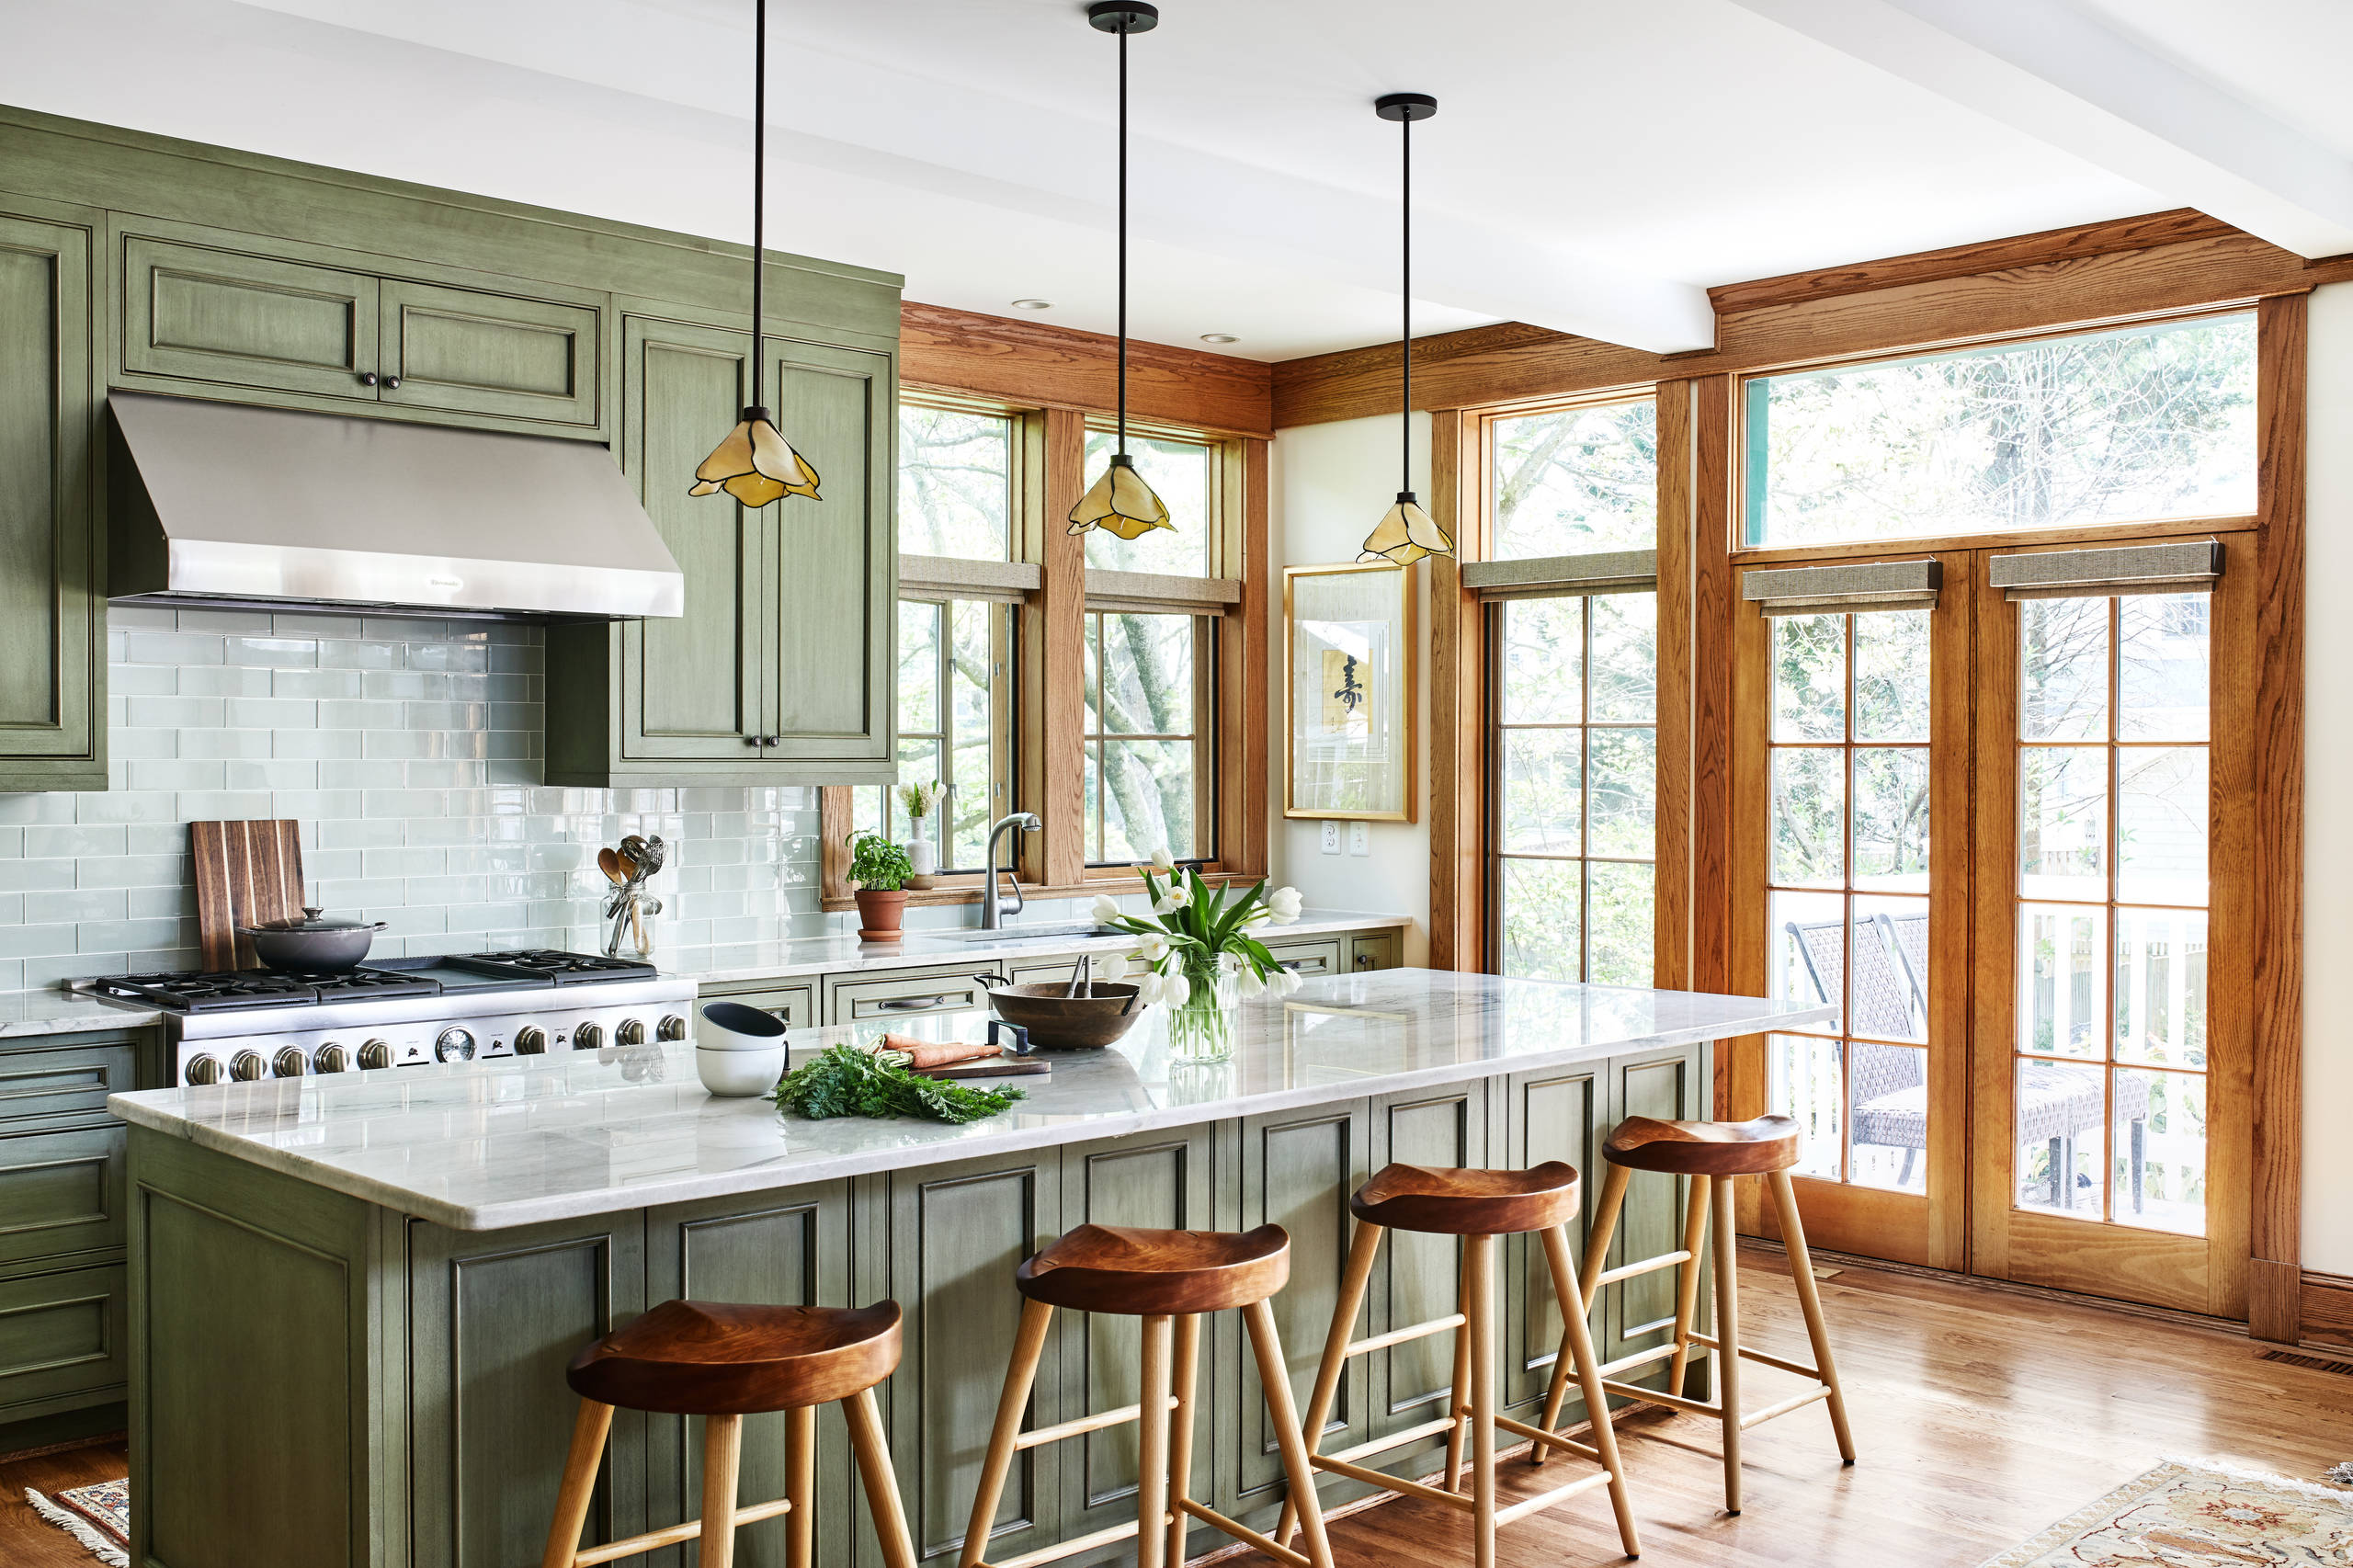 75 Beautiful Craftsman Home Design Houzz Pictures Ideas February 2021 Houzz